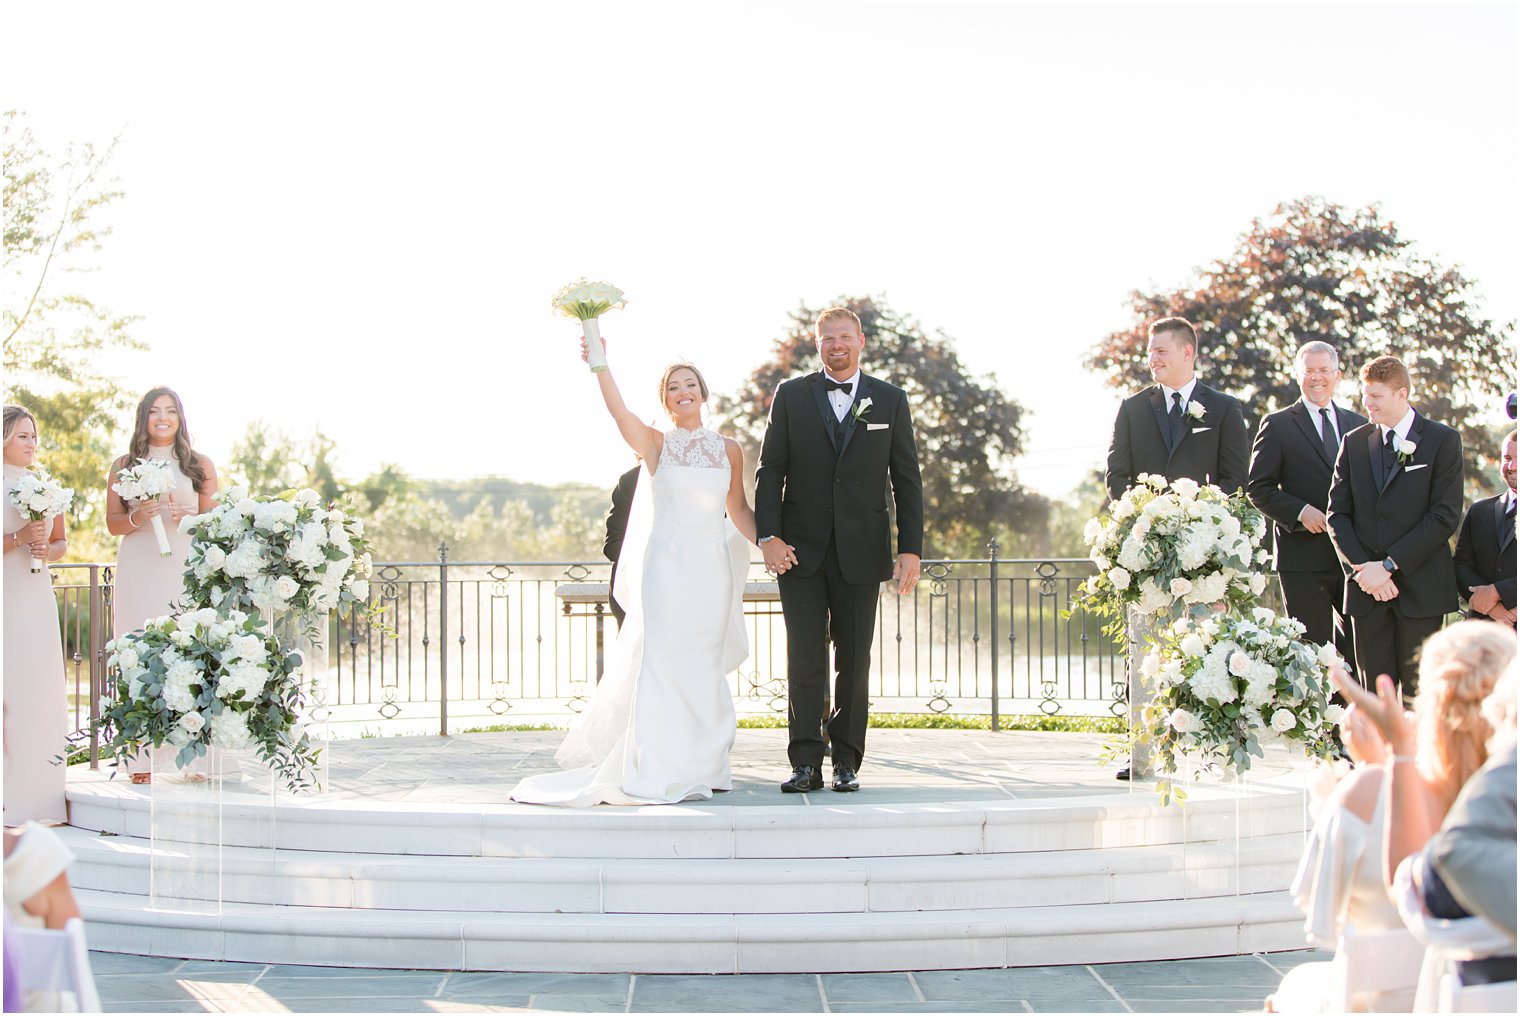 Outdoor wedding ceremony at Park Chateau Estate and Gardens